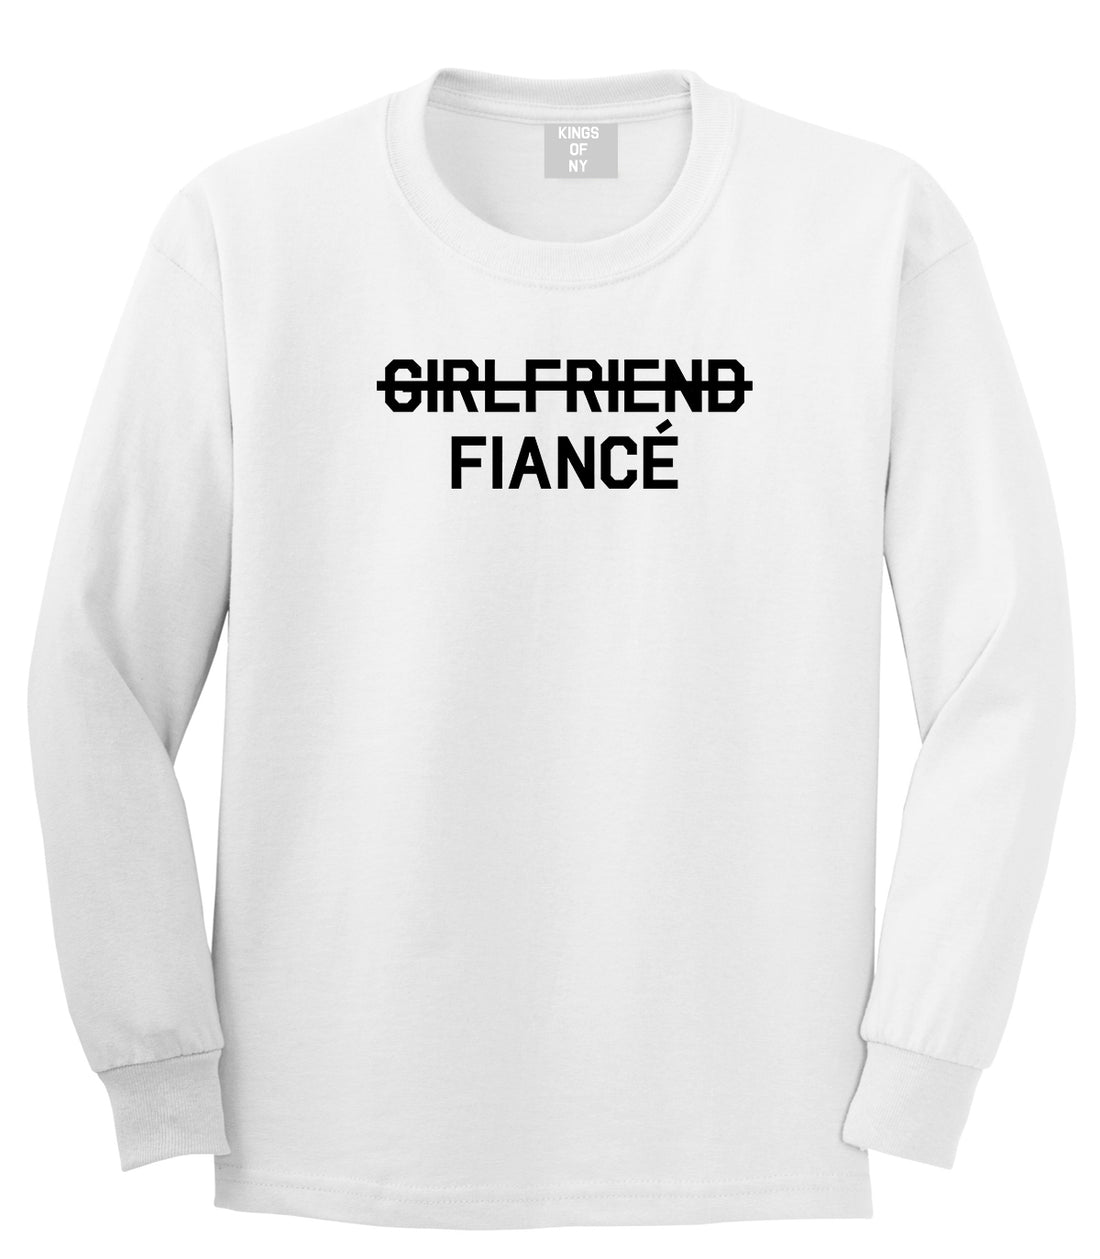 Girlfriend Fiance Engagement Mens White Long Sleeve T-Shirt by KINGS OF NY